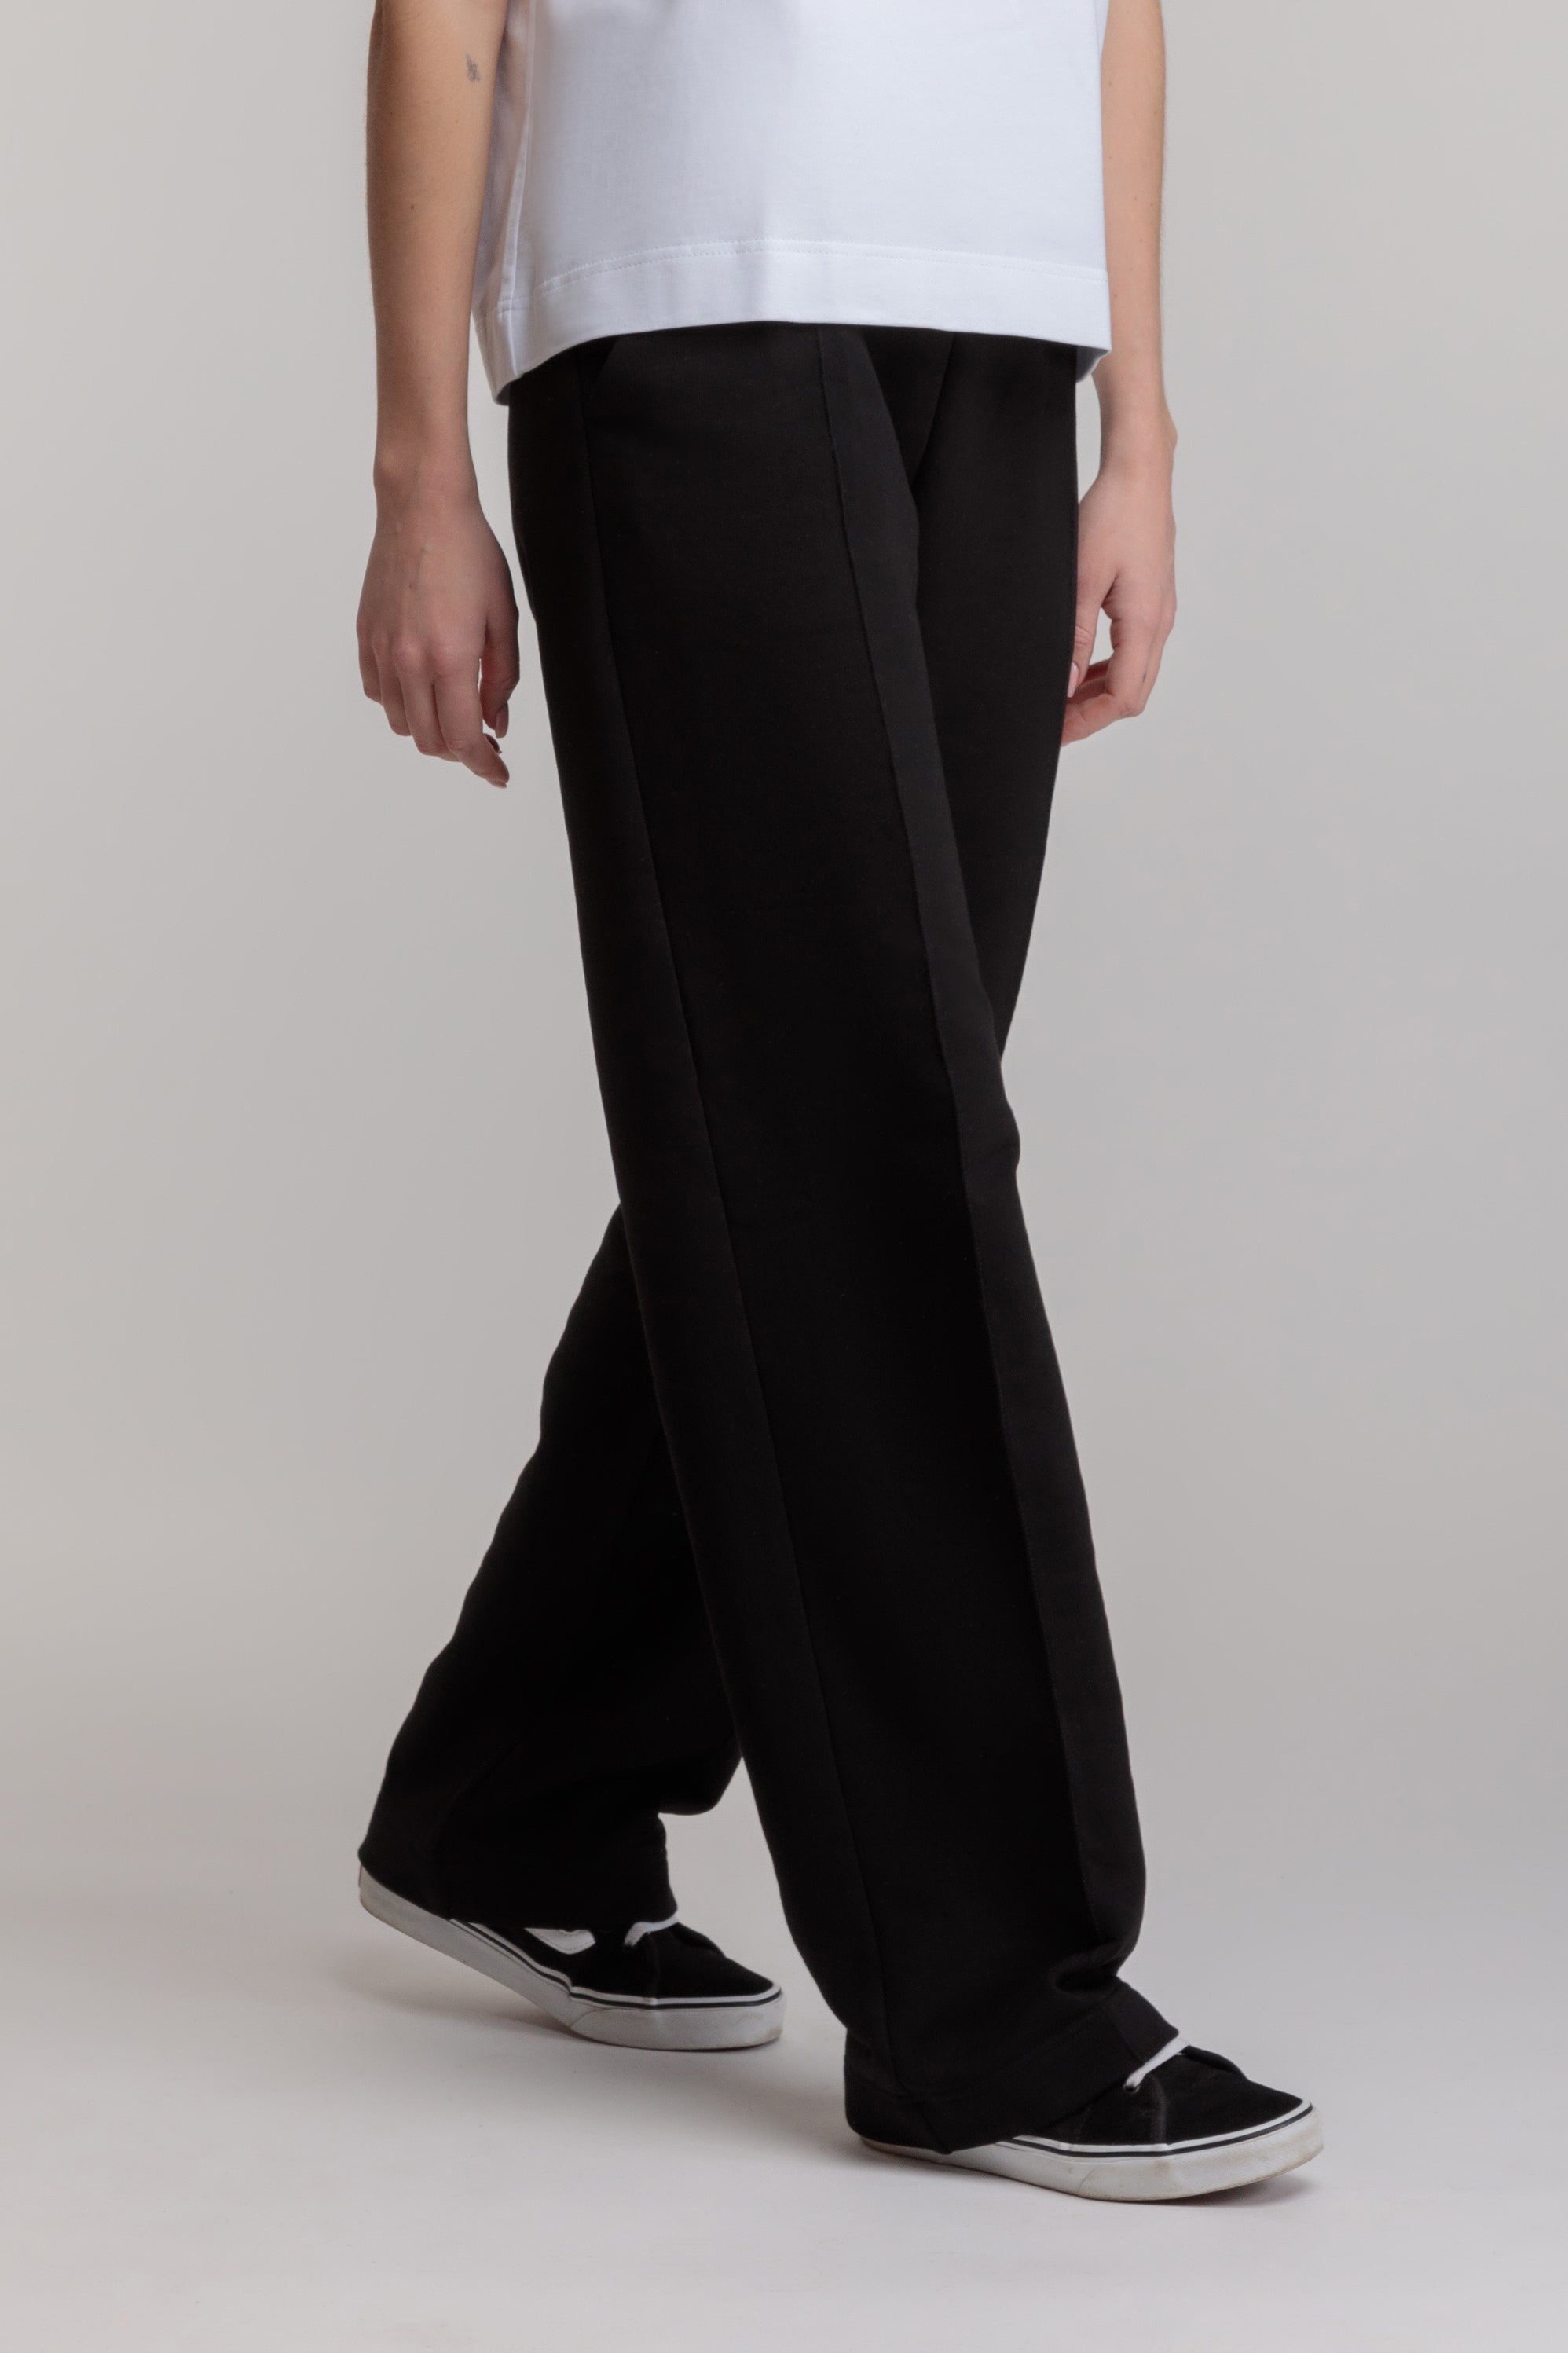 Women's palazzo pants in black color